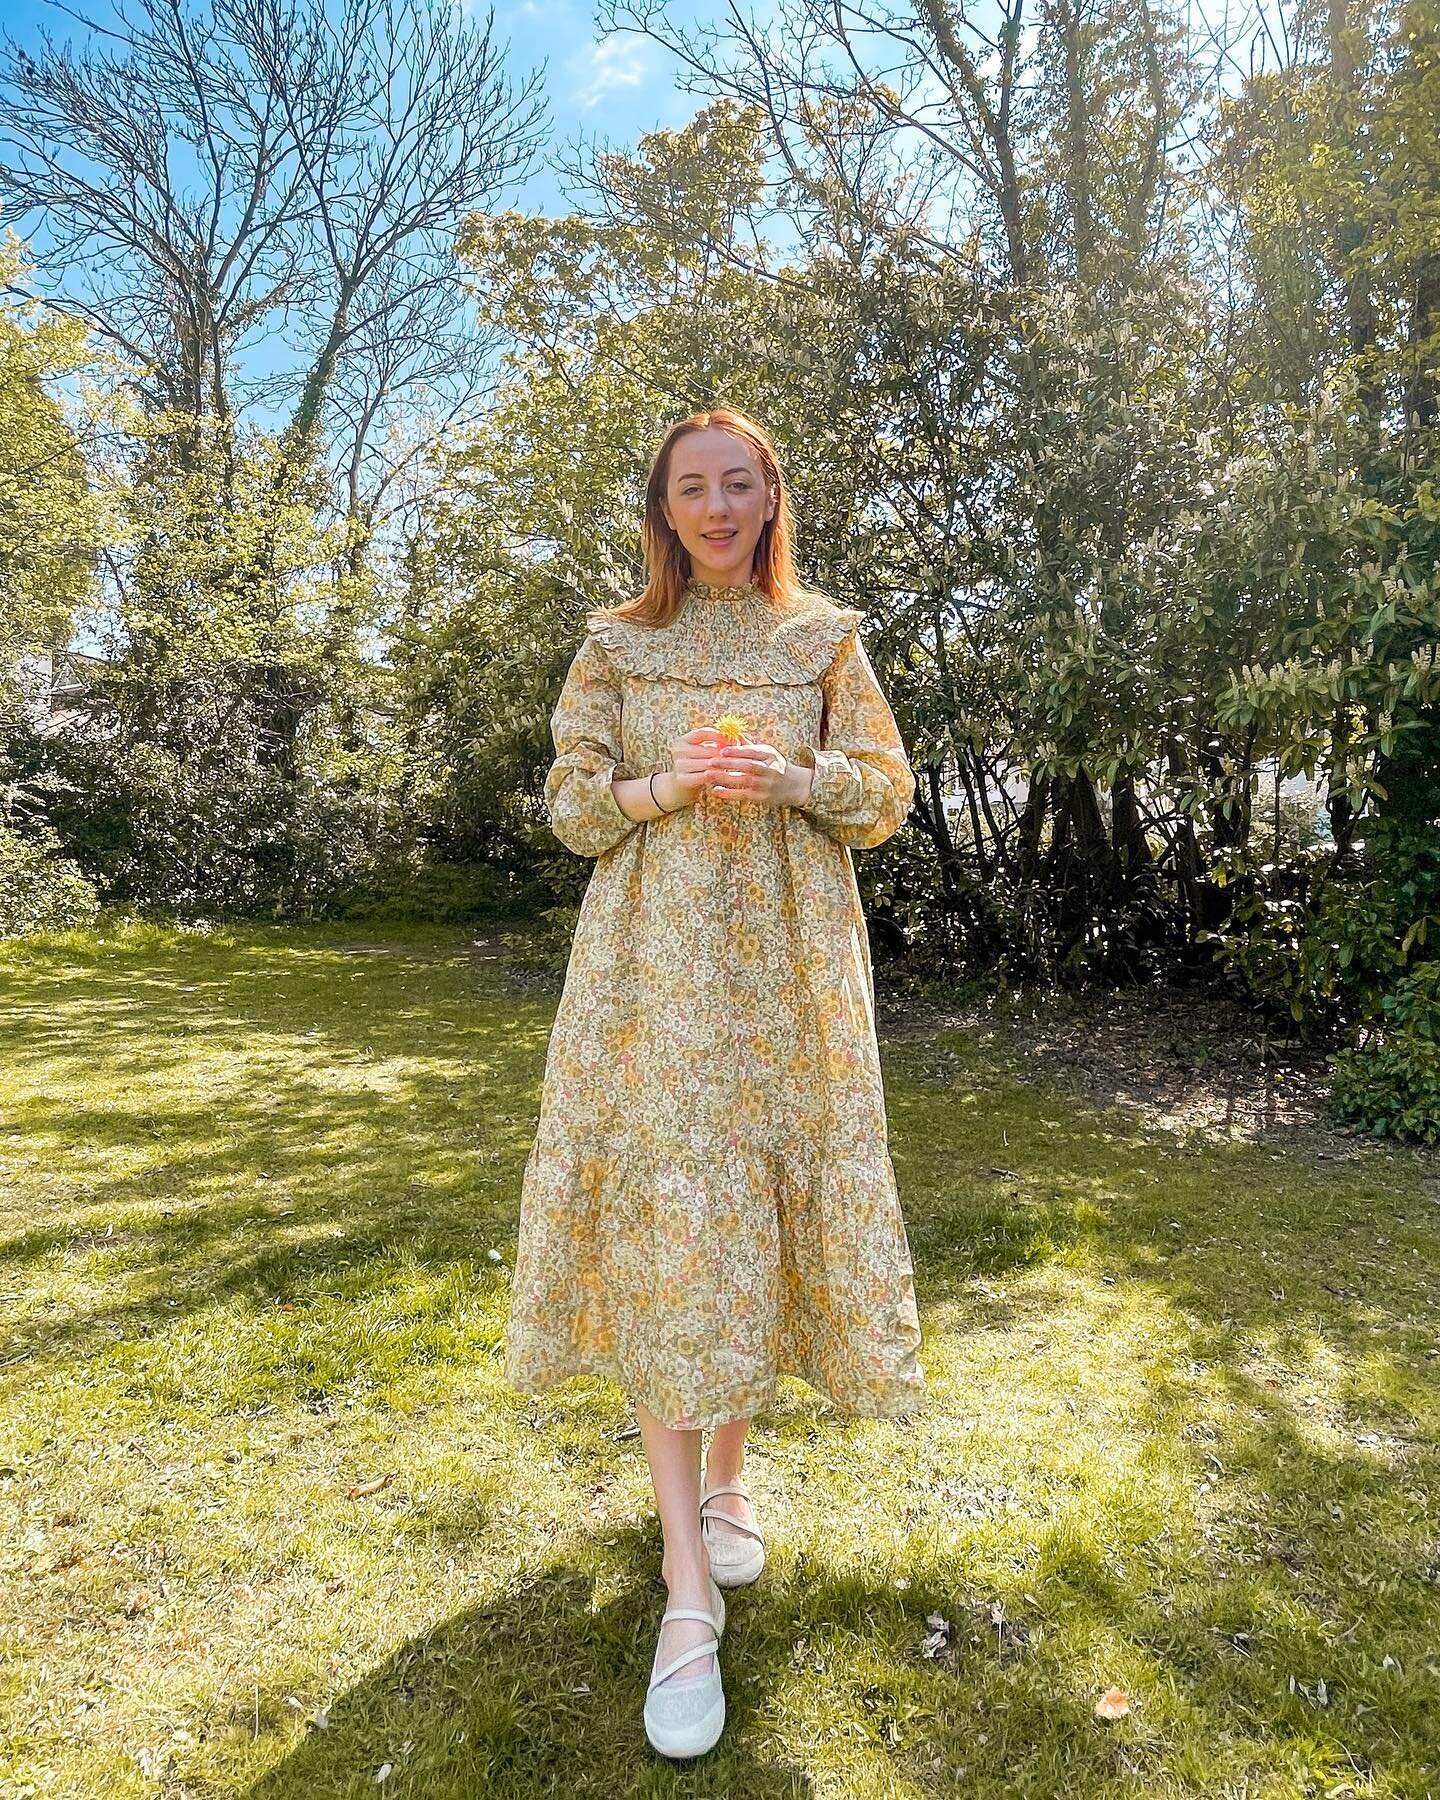 on the meadow in @meadows____ ☀️ joplin dress 100% cotton comfort and independent design 🤝 thank you for the beautiful opportunity to wear! (AD pr sample)